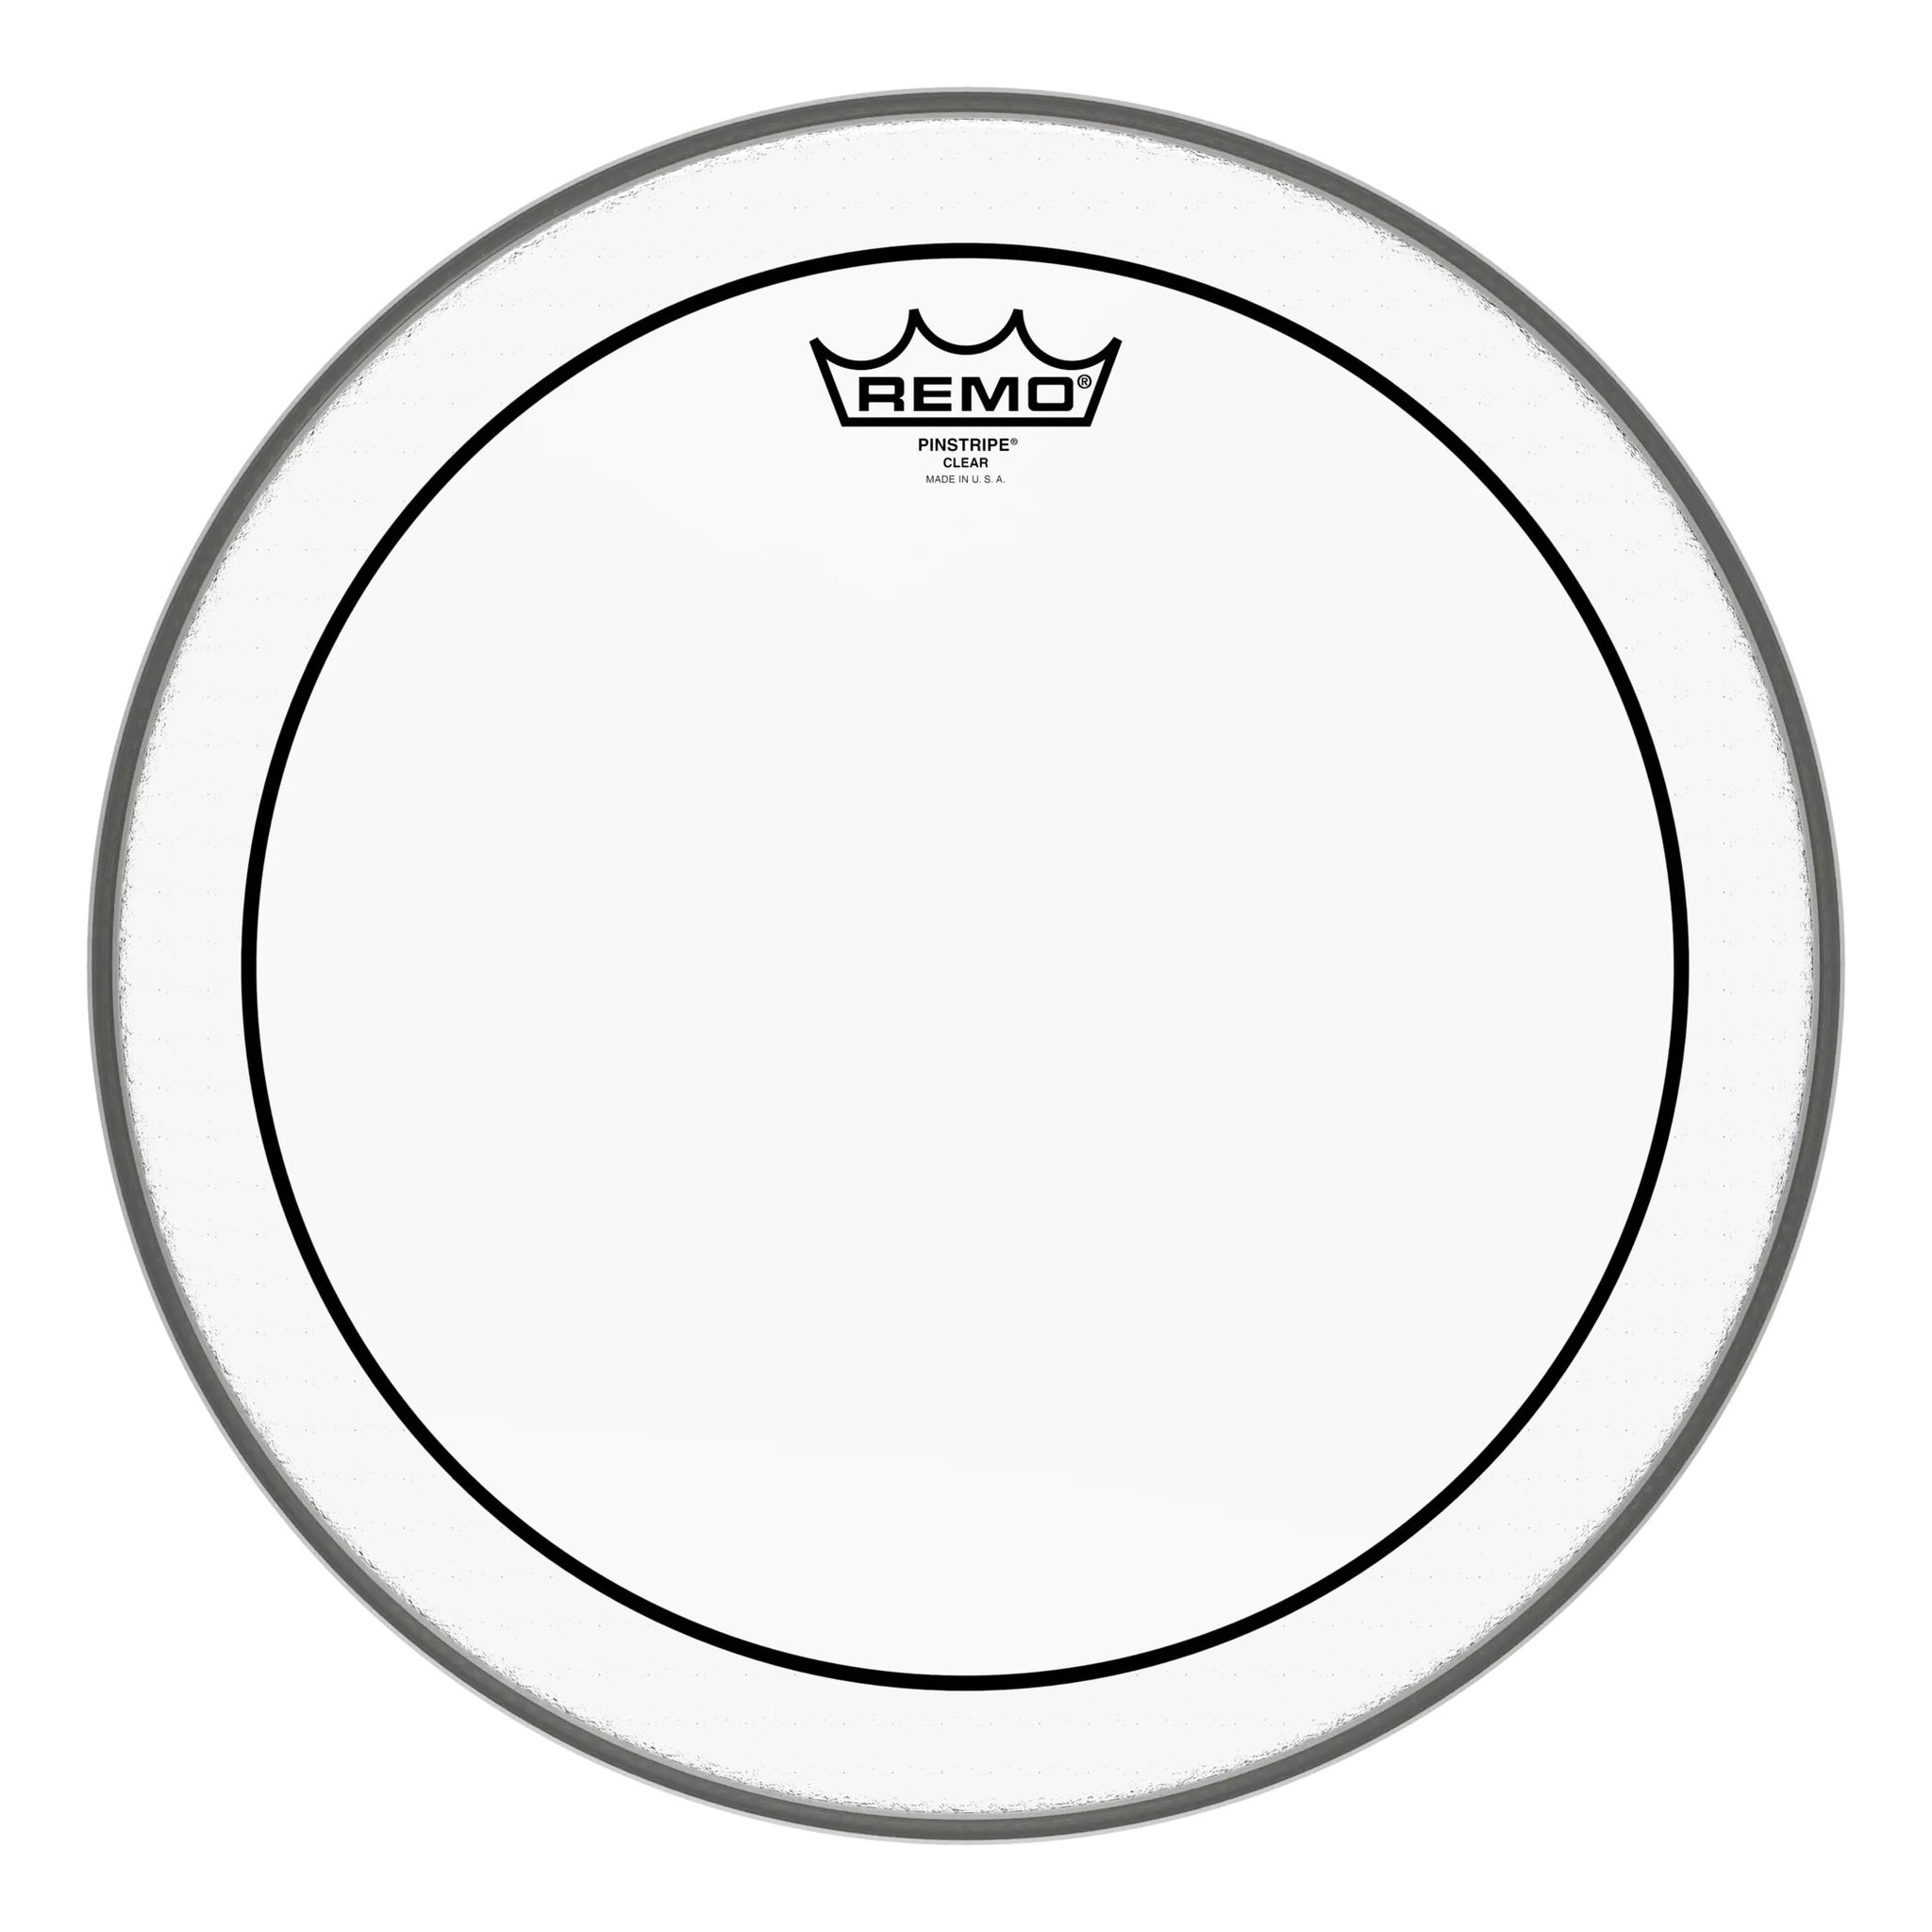 REMO PS031000 10" Clear Pinstripe Drum Head